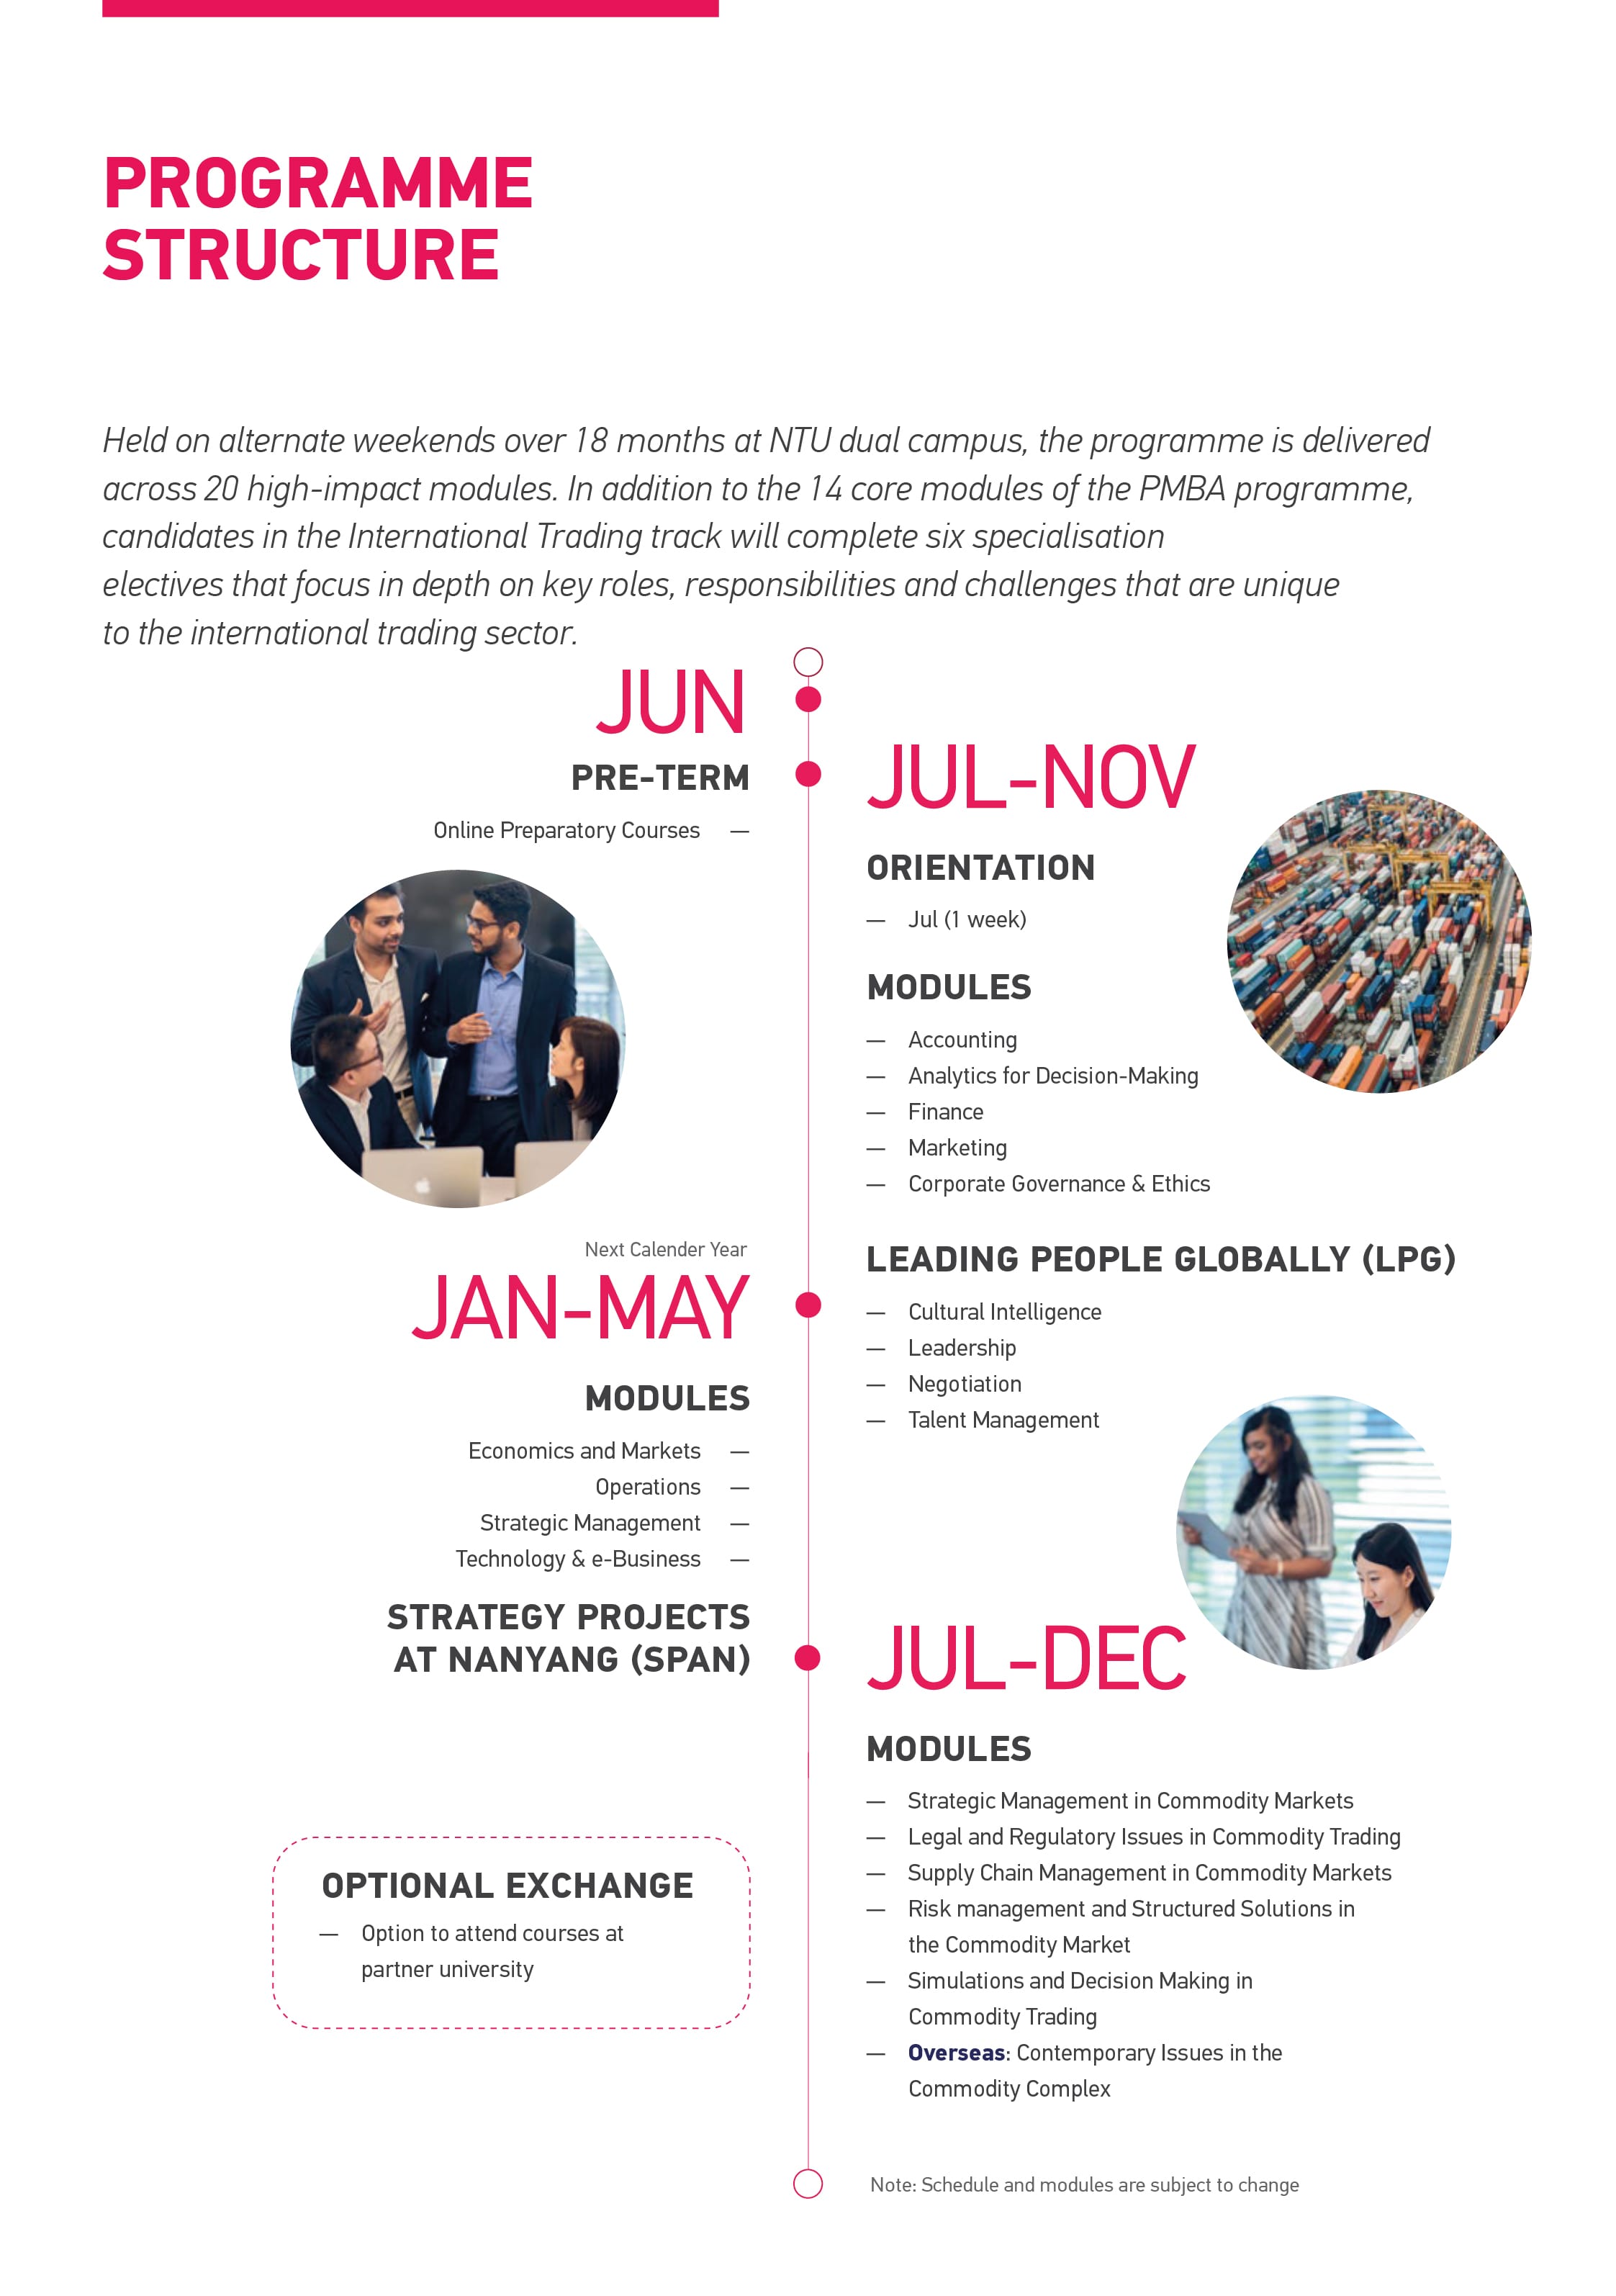 Infographic: Programme schedule for Nanyang Professional MBA (International Trading) Nanyang Business School, Singapore